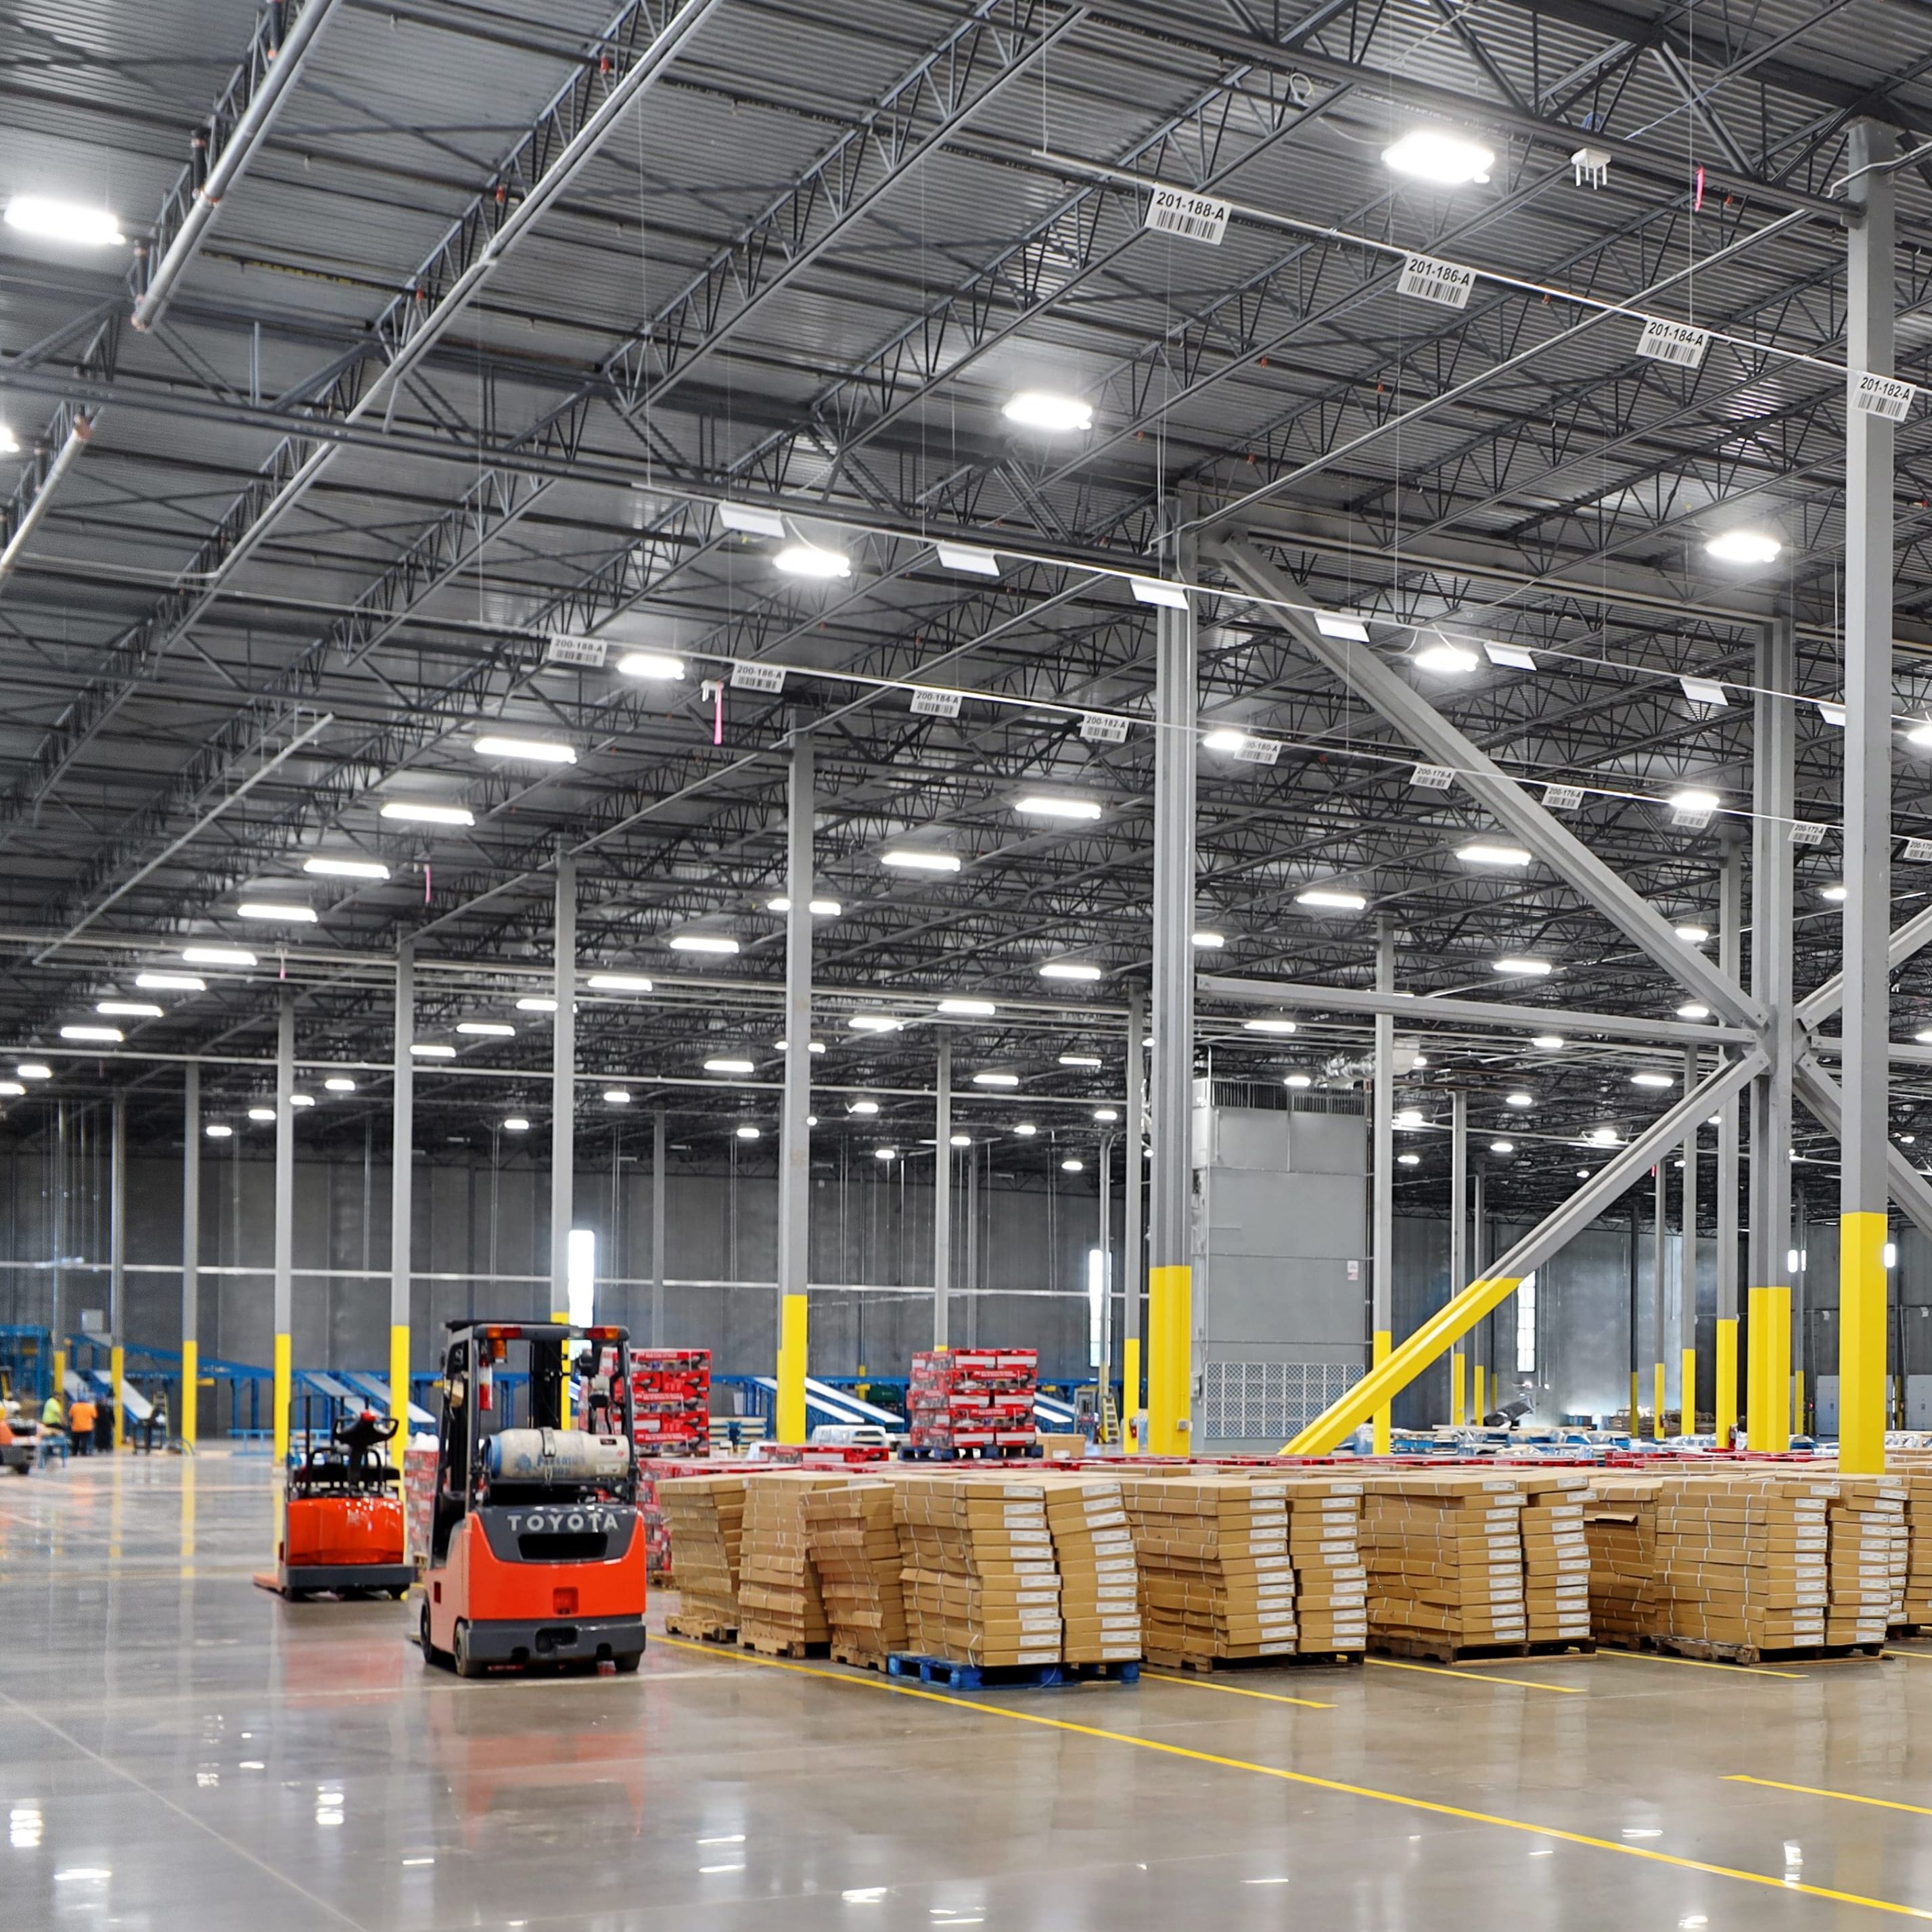 Interior of large warehouse industrial building with parked fork